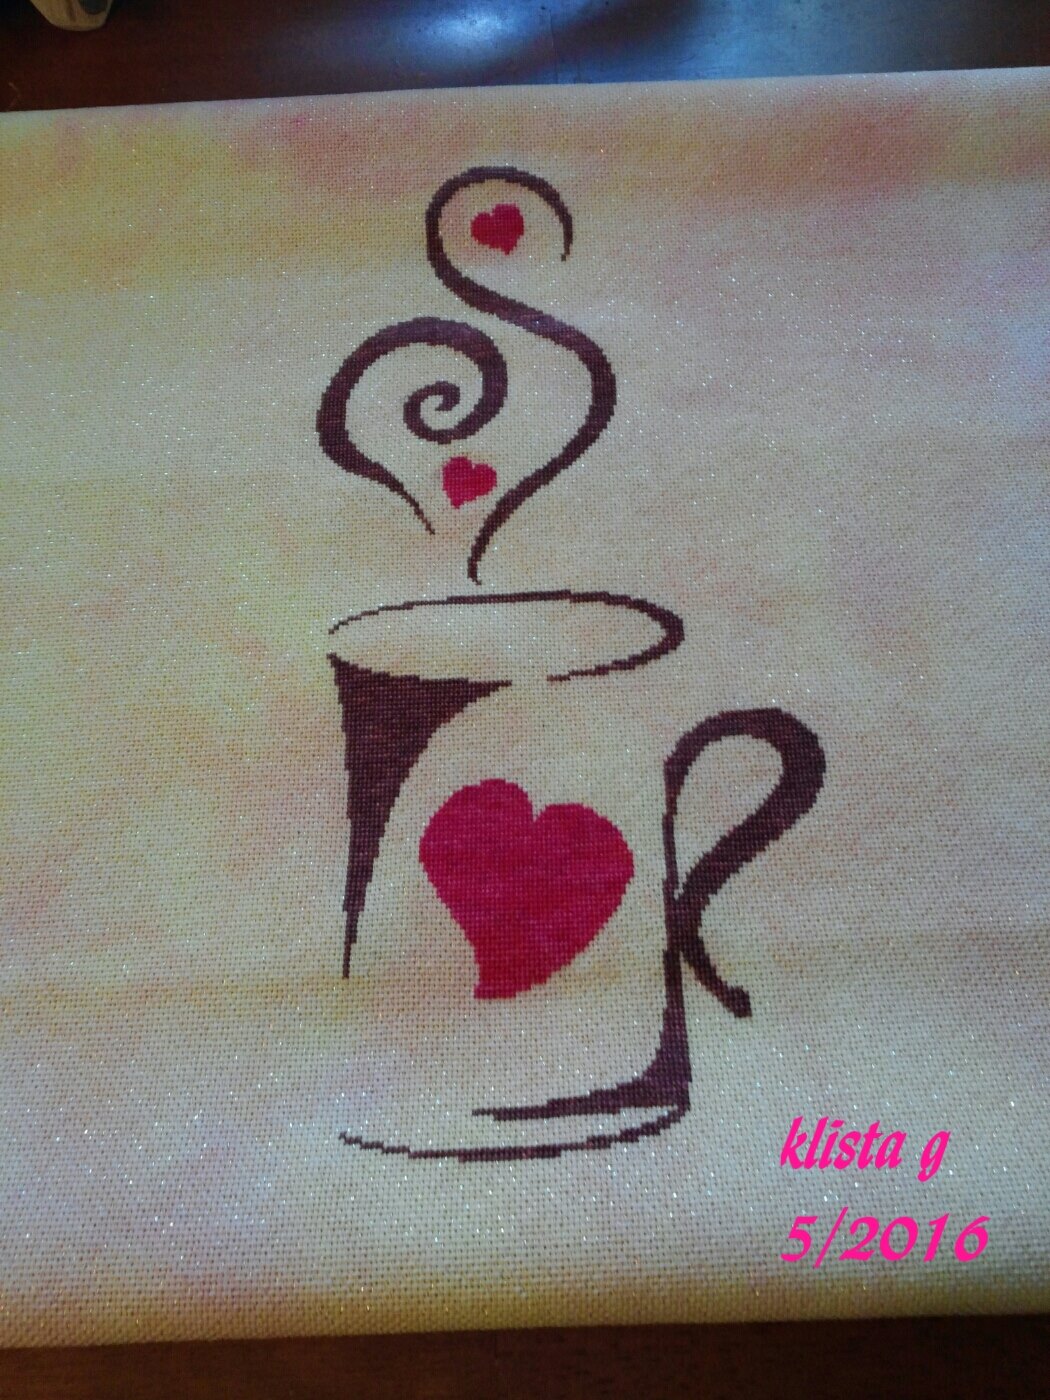 Gallery Cup Of Hearts